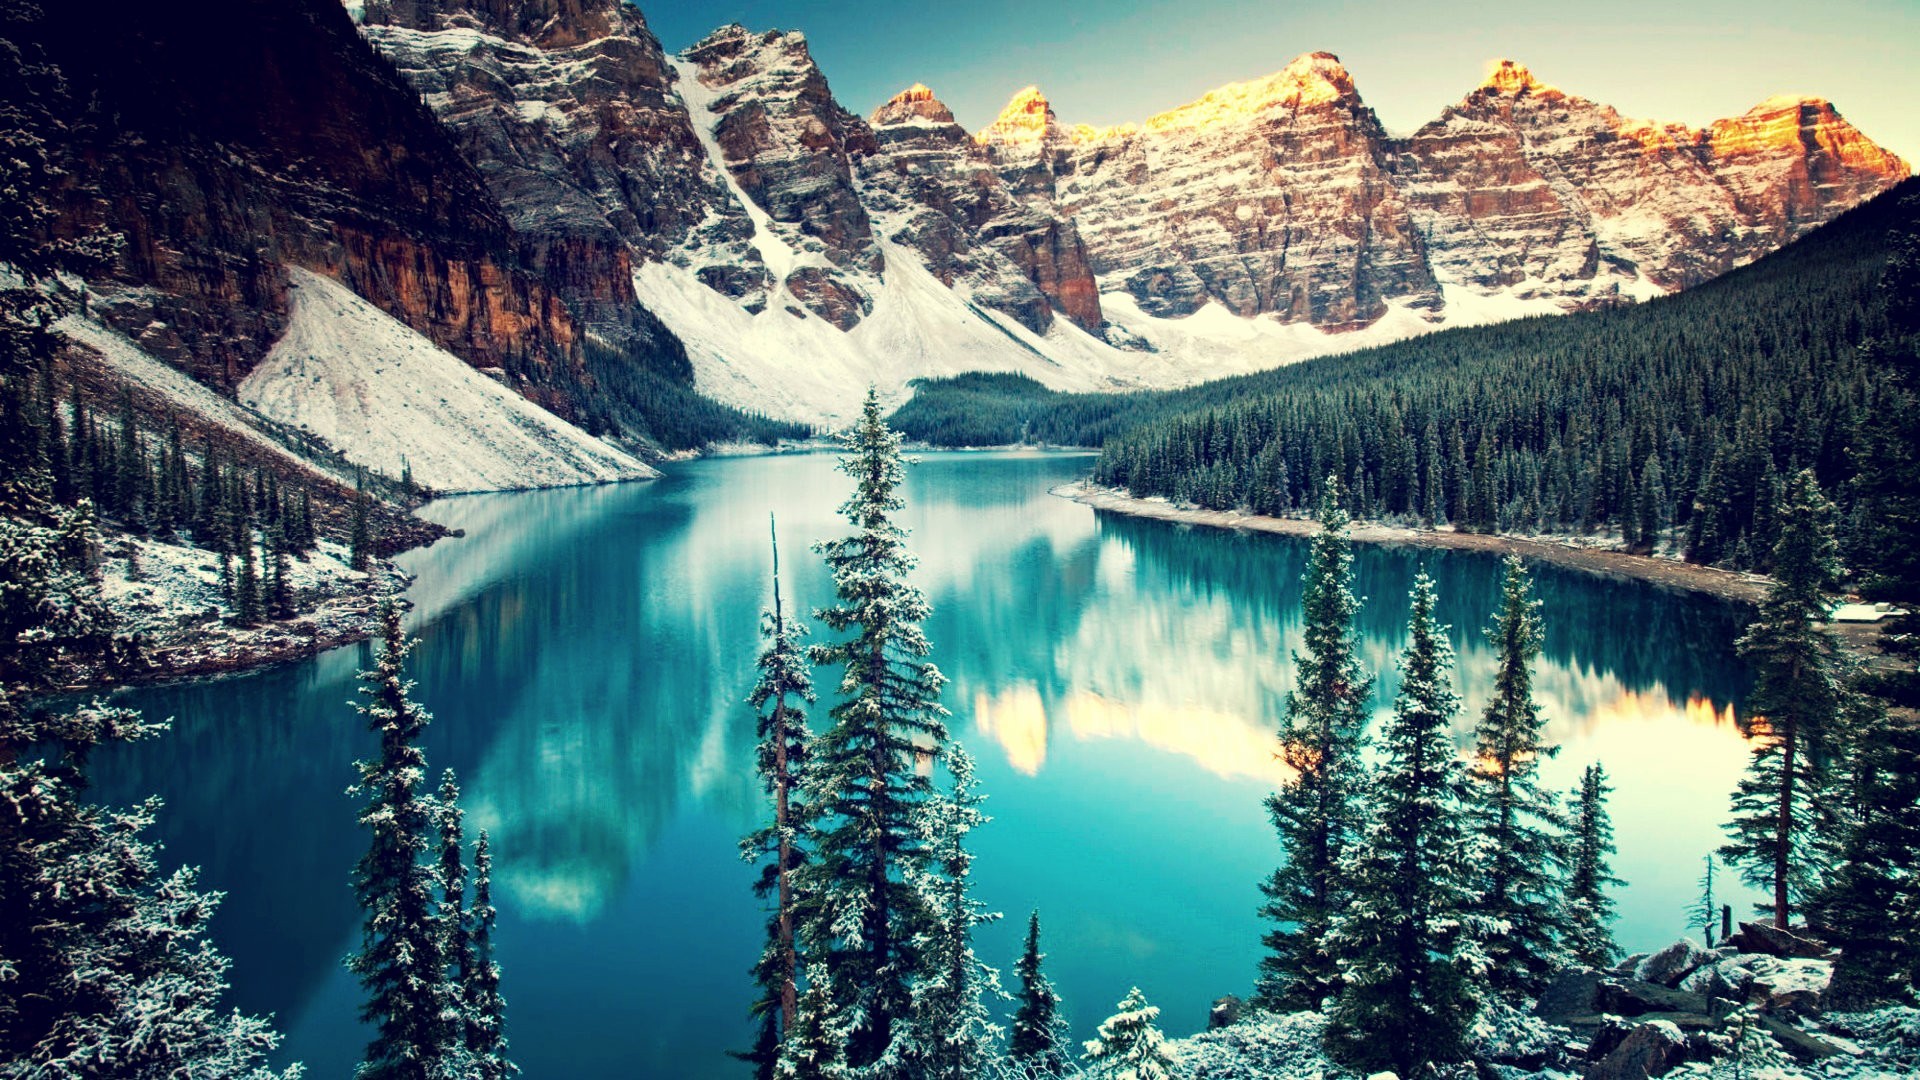 General 1920x1080 lake forest Moraine Lake mountains Canada pine trees Banff National Park valley nature trees reflection snow landscape cyan